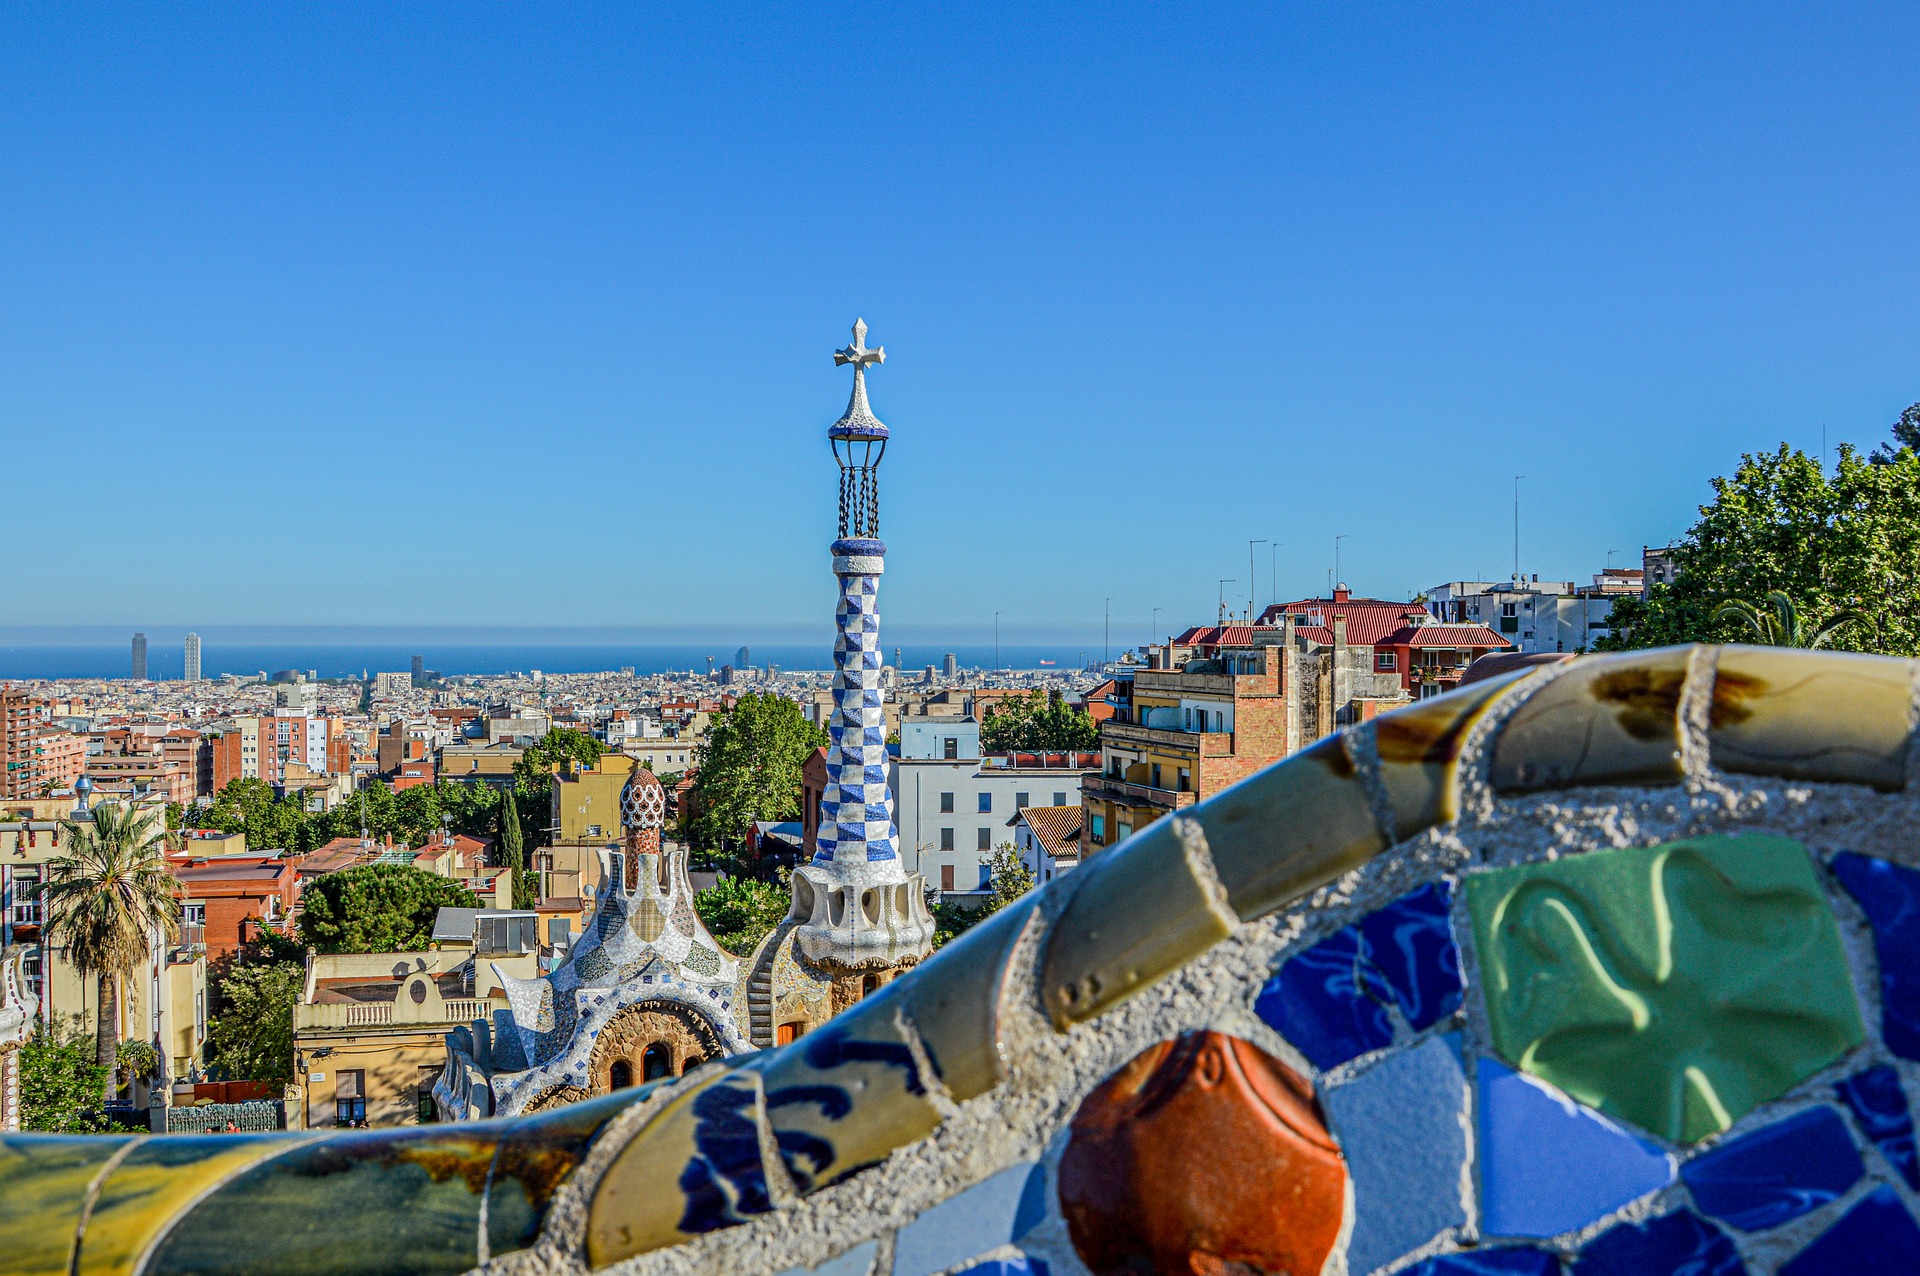 Barcelona banning tourist vacation rentals by 2028